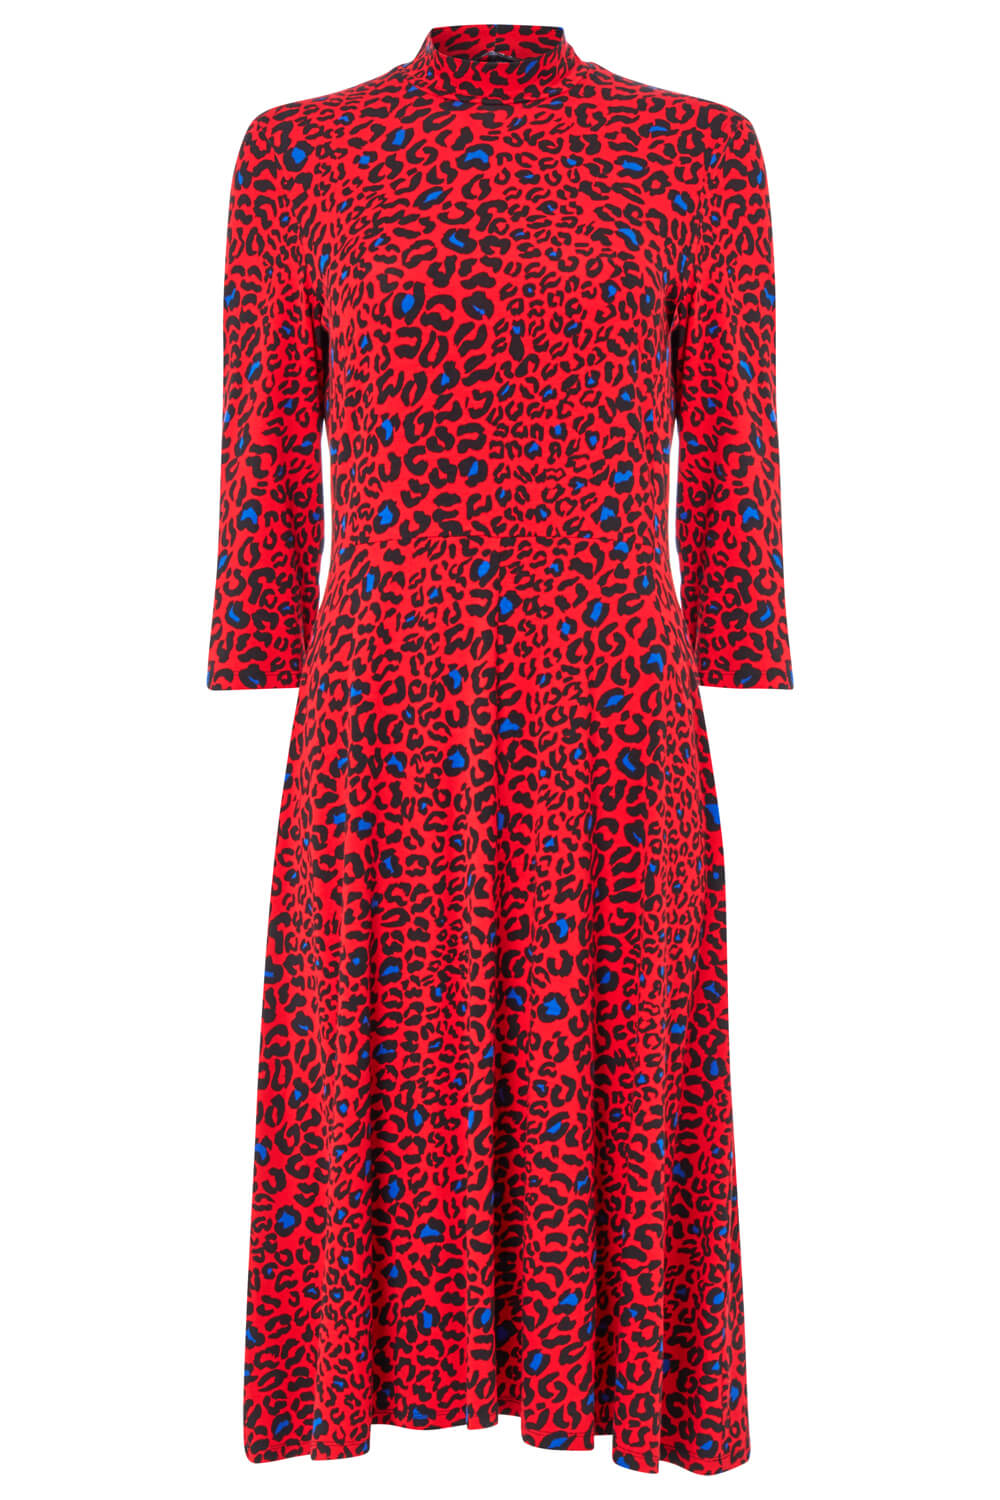 blue and red leopard print dress